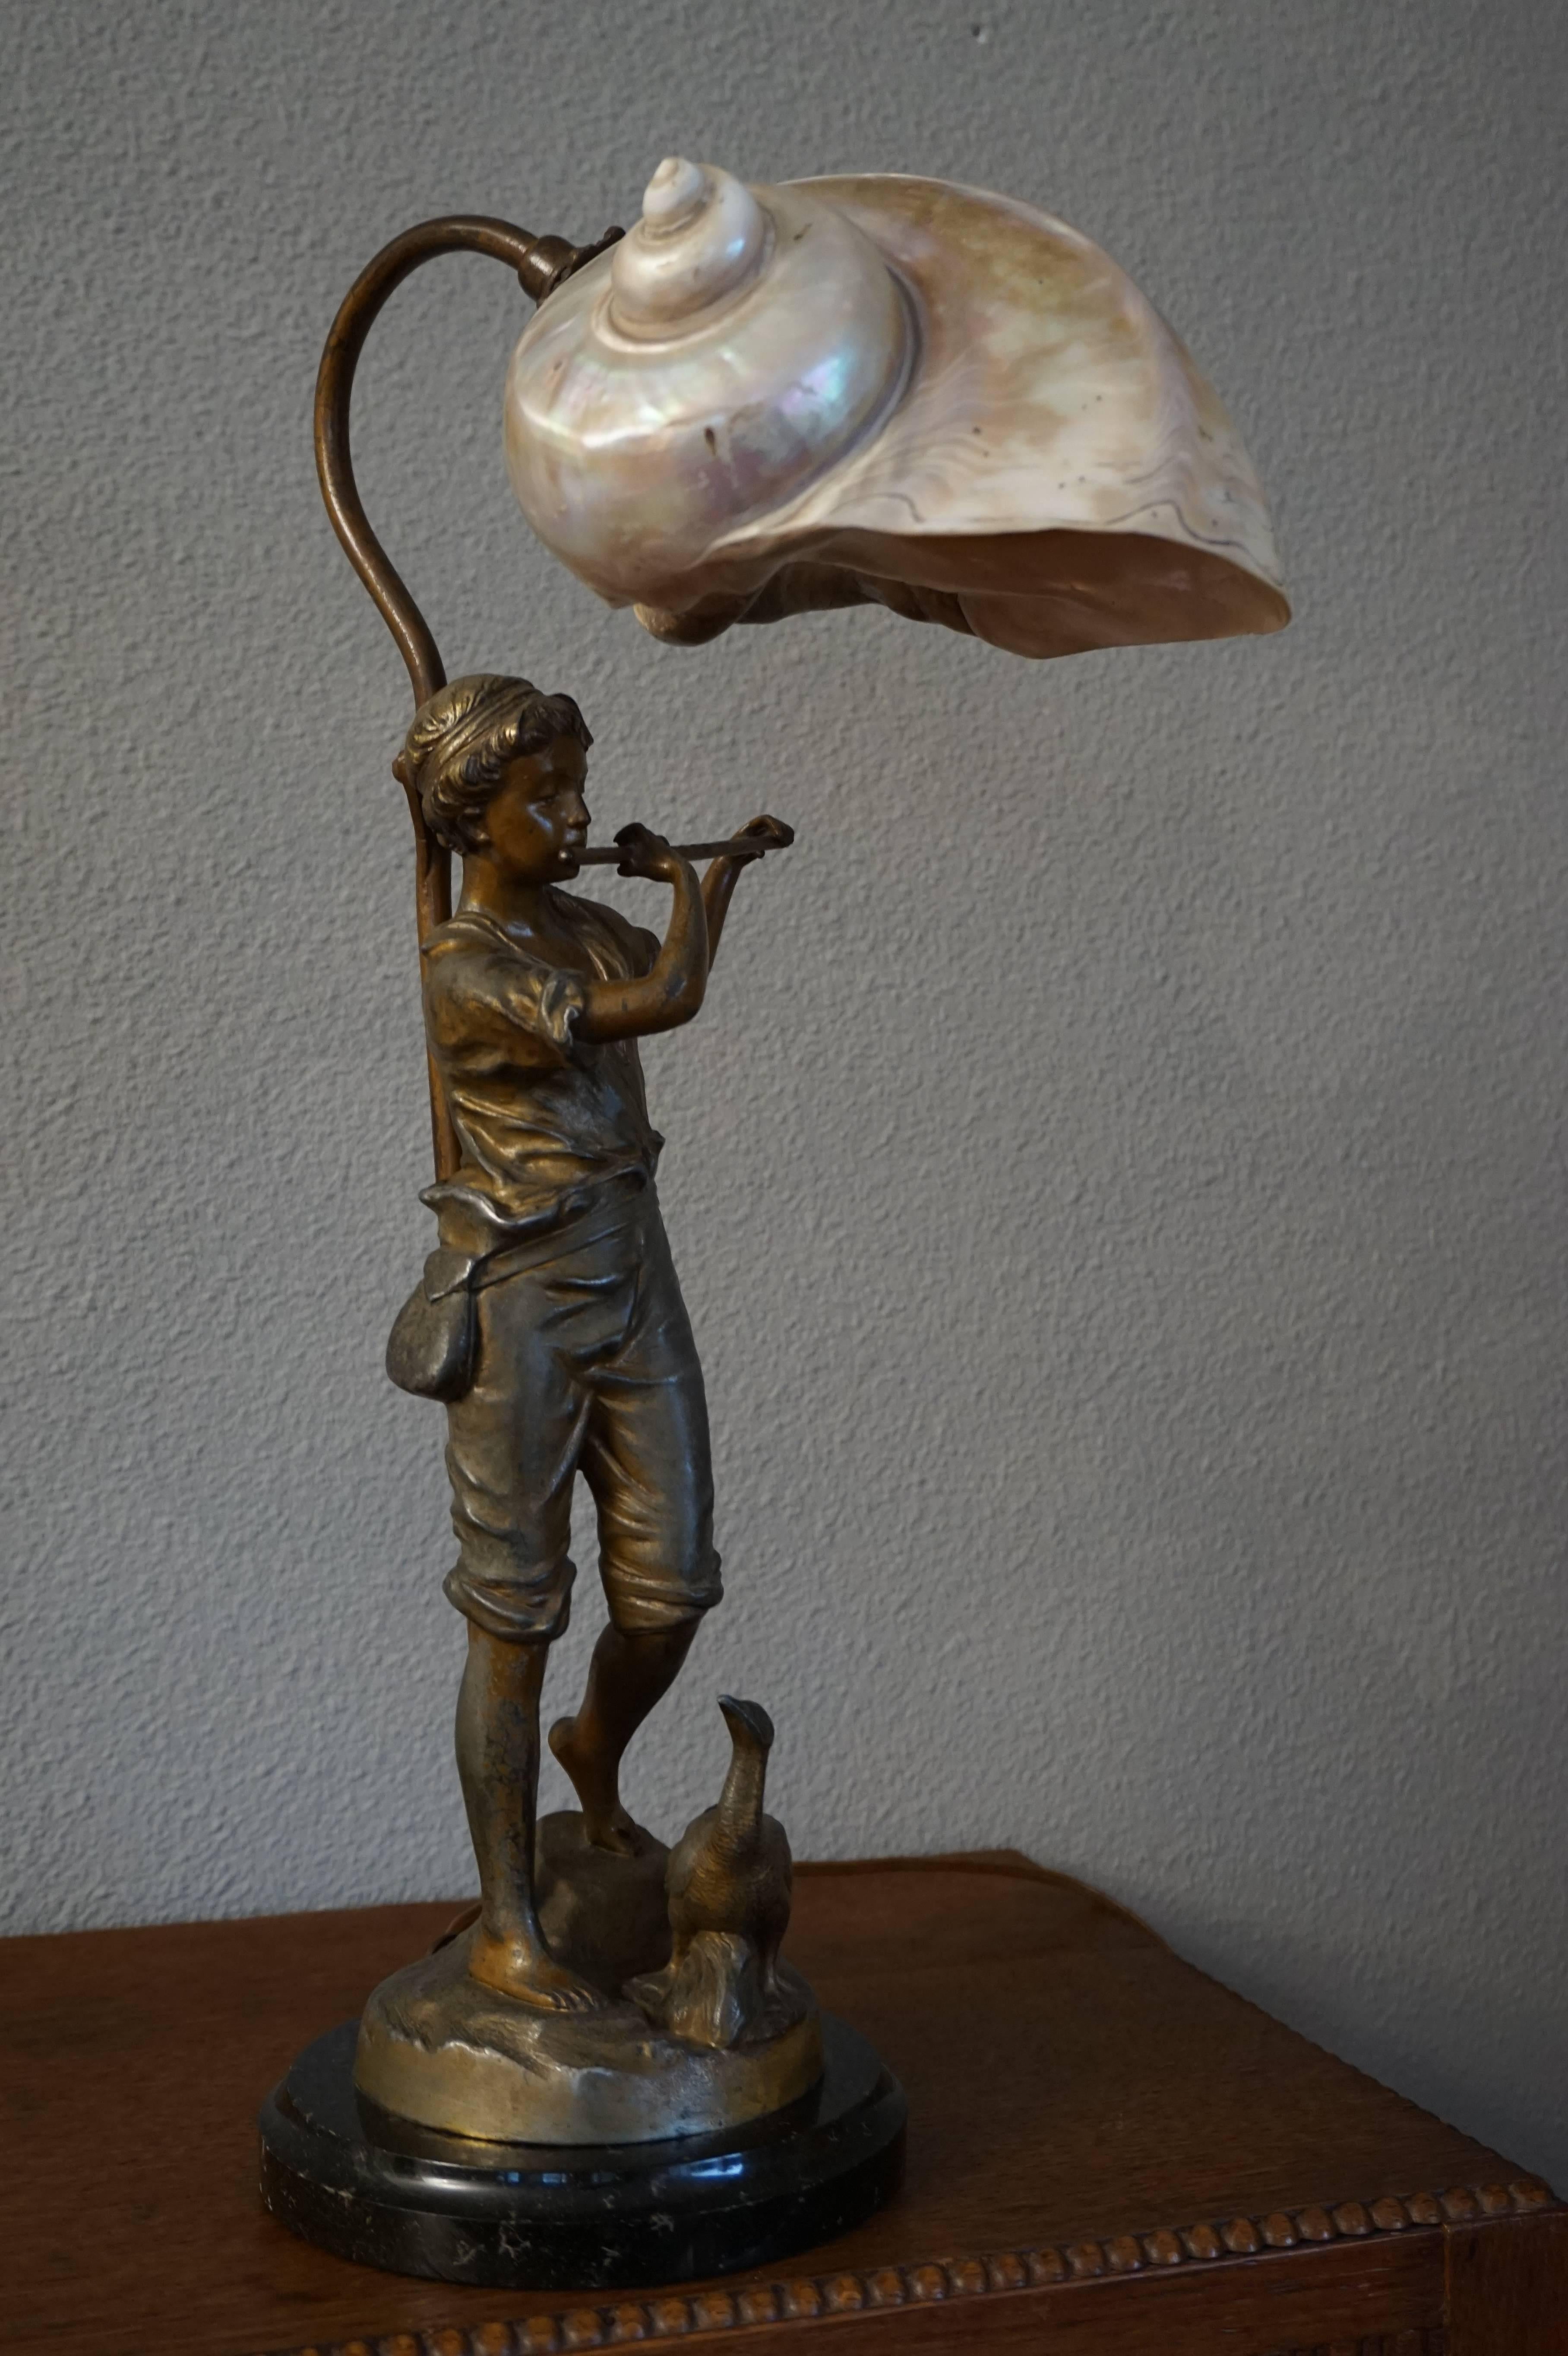 Rare and beautiful table lamp on a marble base.

This is the type of applied arts that really lifts your spirit. The fluit playing boy sculpture with it's realistic features and fine details radiates pure innocence. Even the bird feels at ease